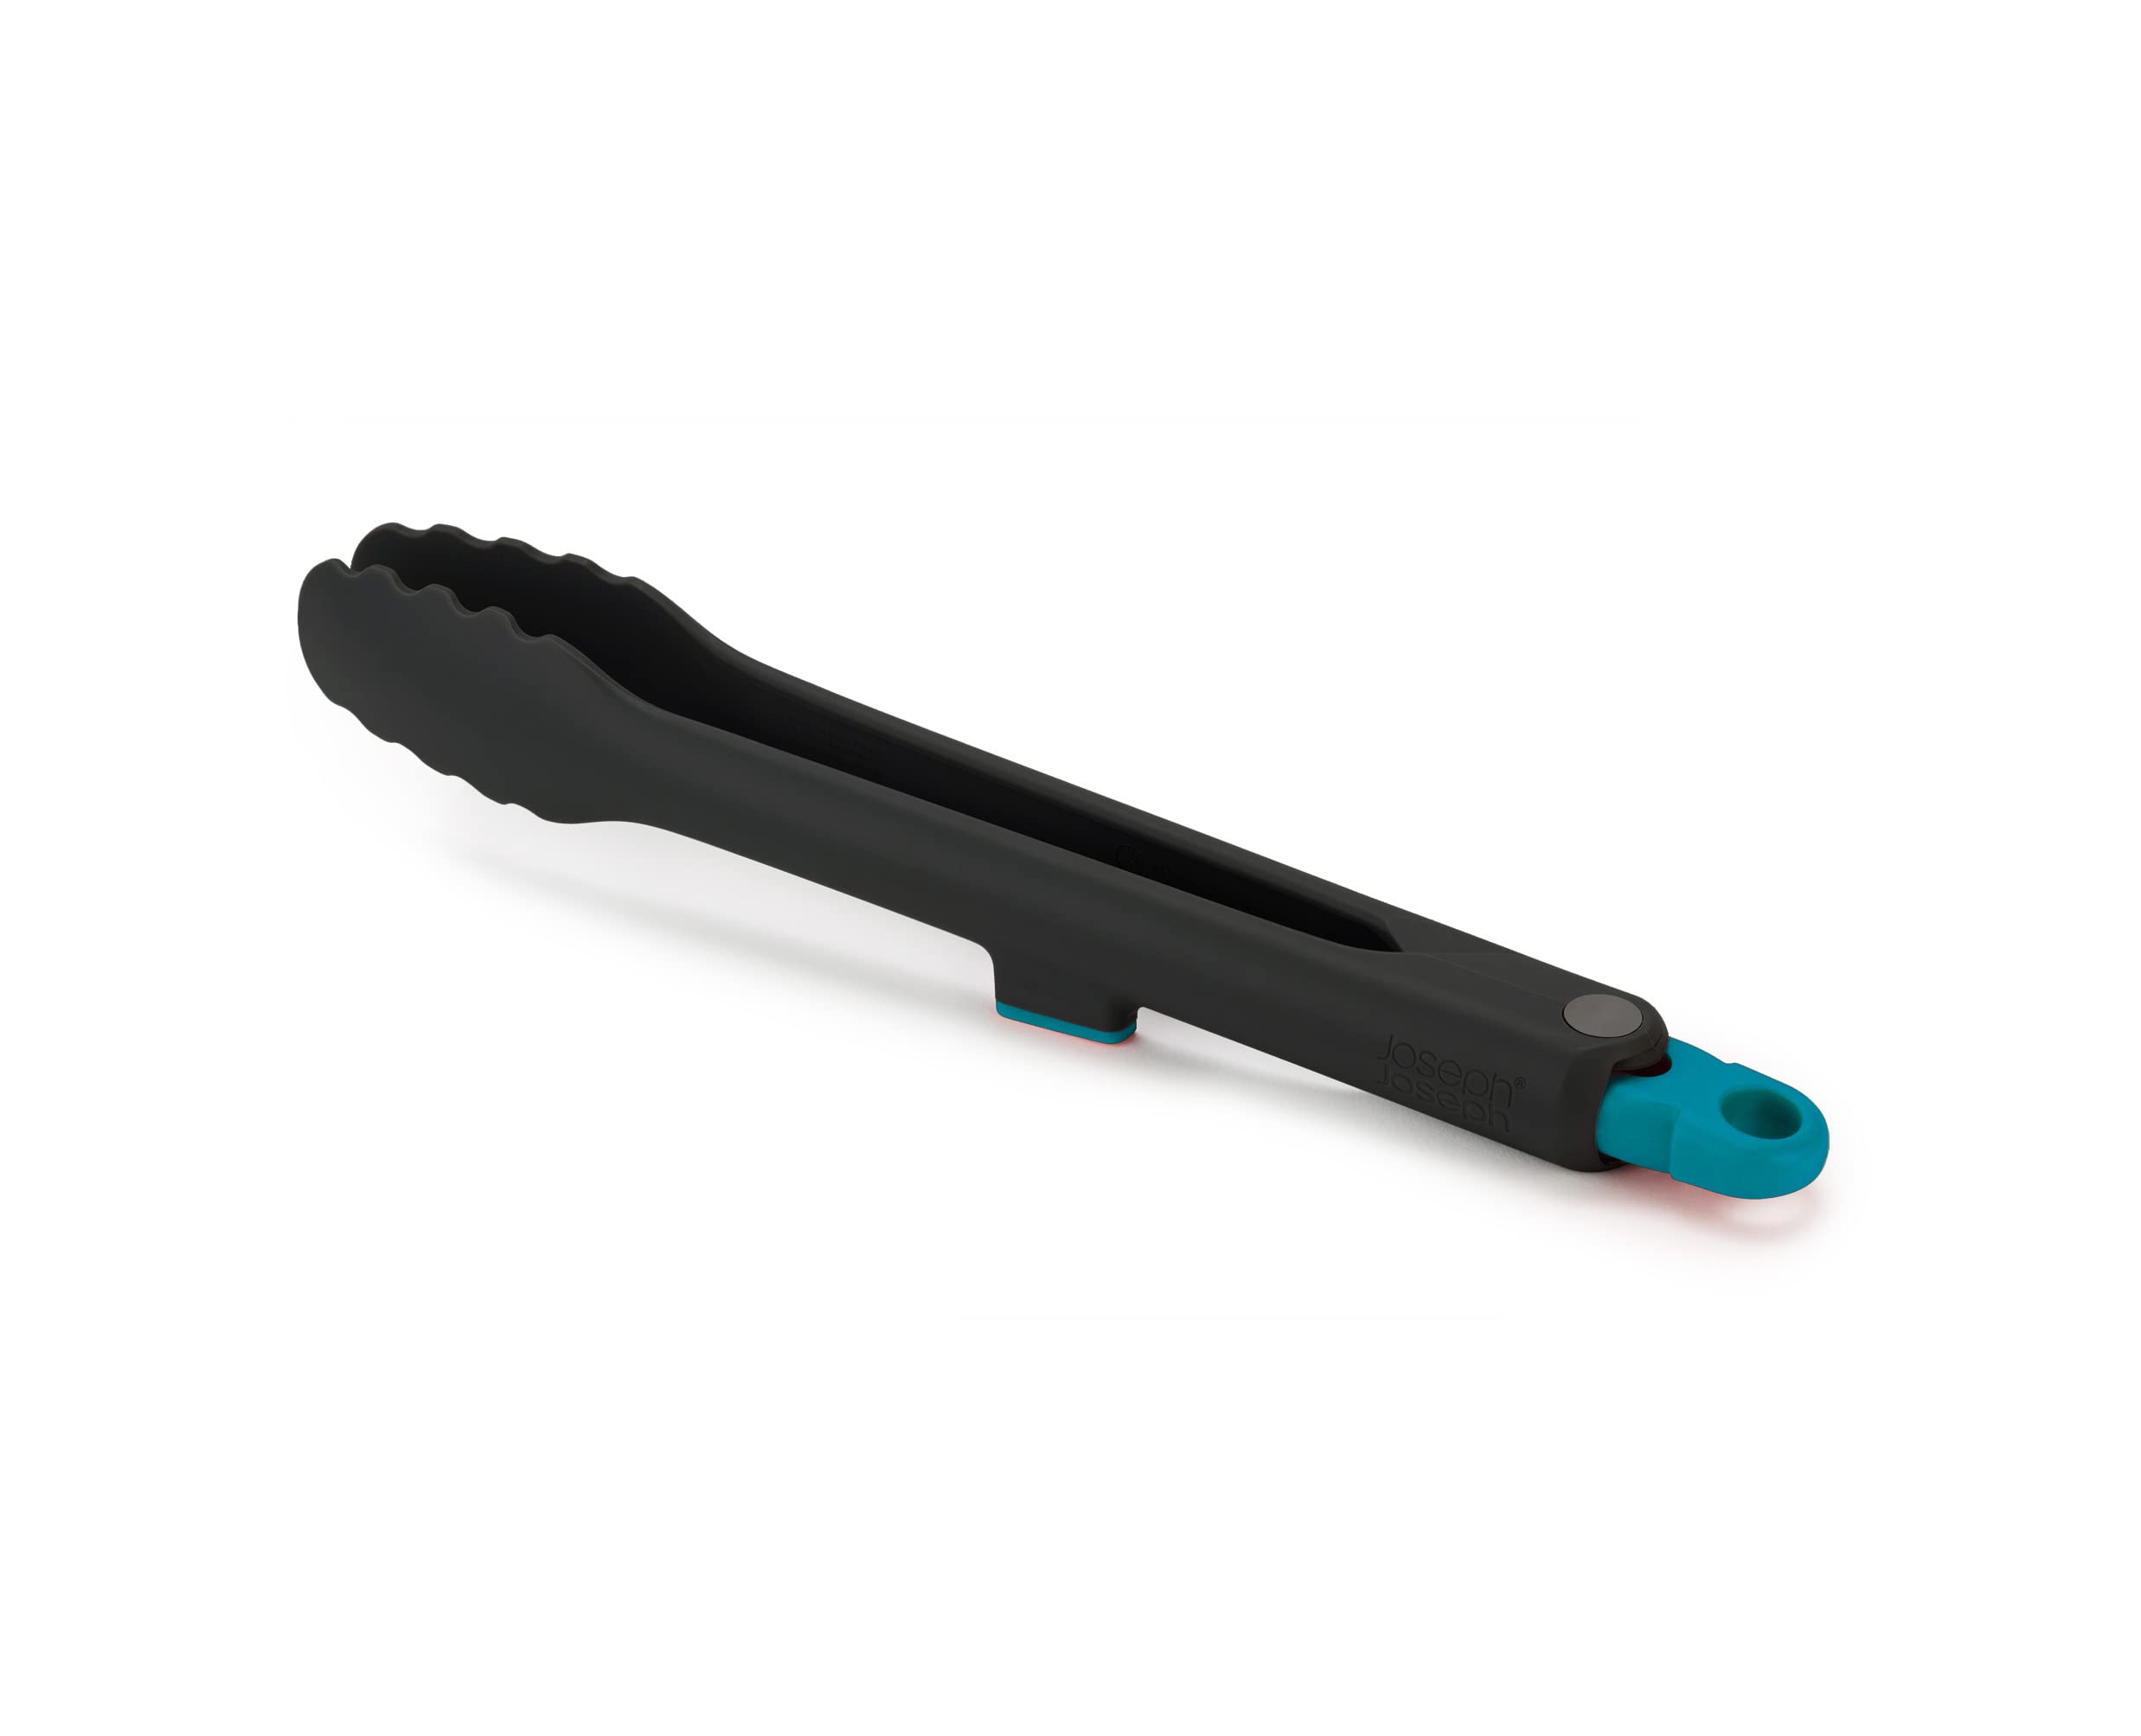 Joseph Joseph Duo Lockable Tongs Hygienic with Integrated Tool Rest & Non-Slip Feet, Suitable for Non-Stick Cookware, Heat-Resistant